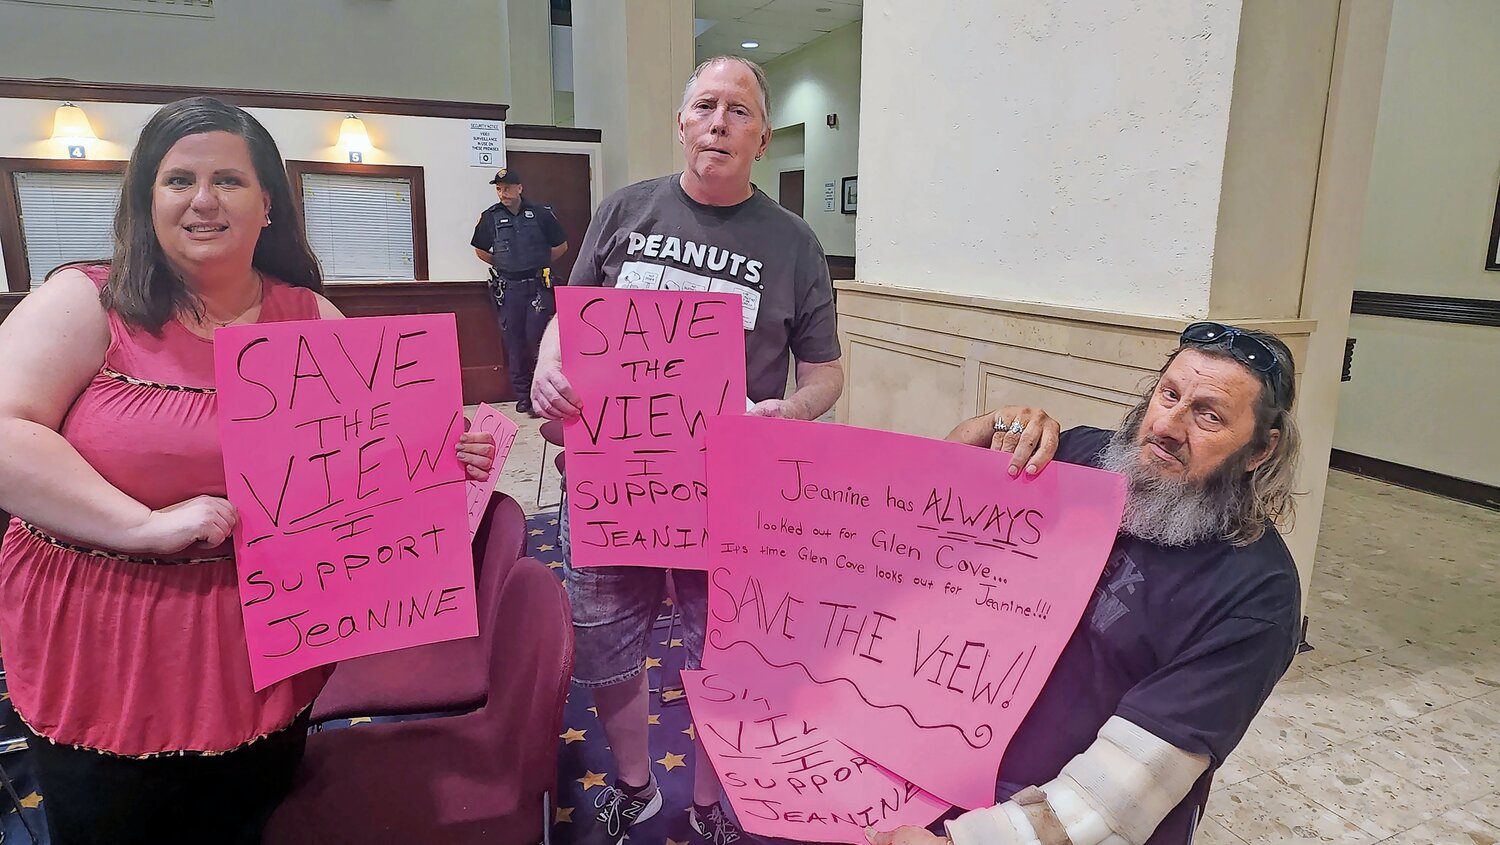 Gracie Donaldson Cipriano, left, James Hallinan and Tim Dunn, who support The View Grill, voiced their concerns at City Hall. They believe the city’s RFP is beyond the reach of the restaurant’s owner, Jeanine DiMenna, a beloved member of the community.